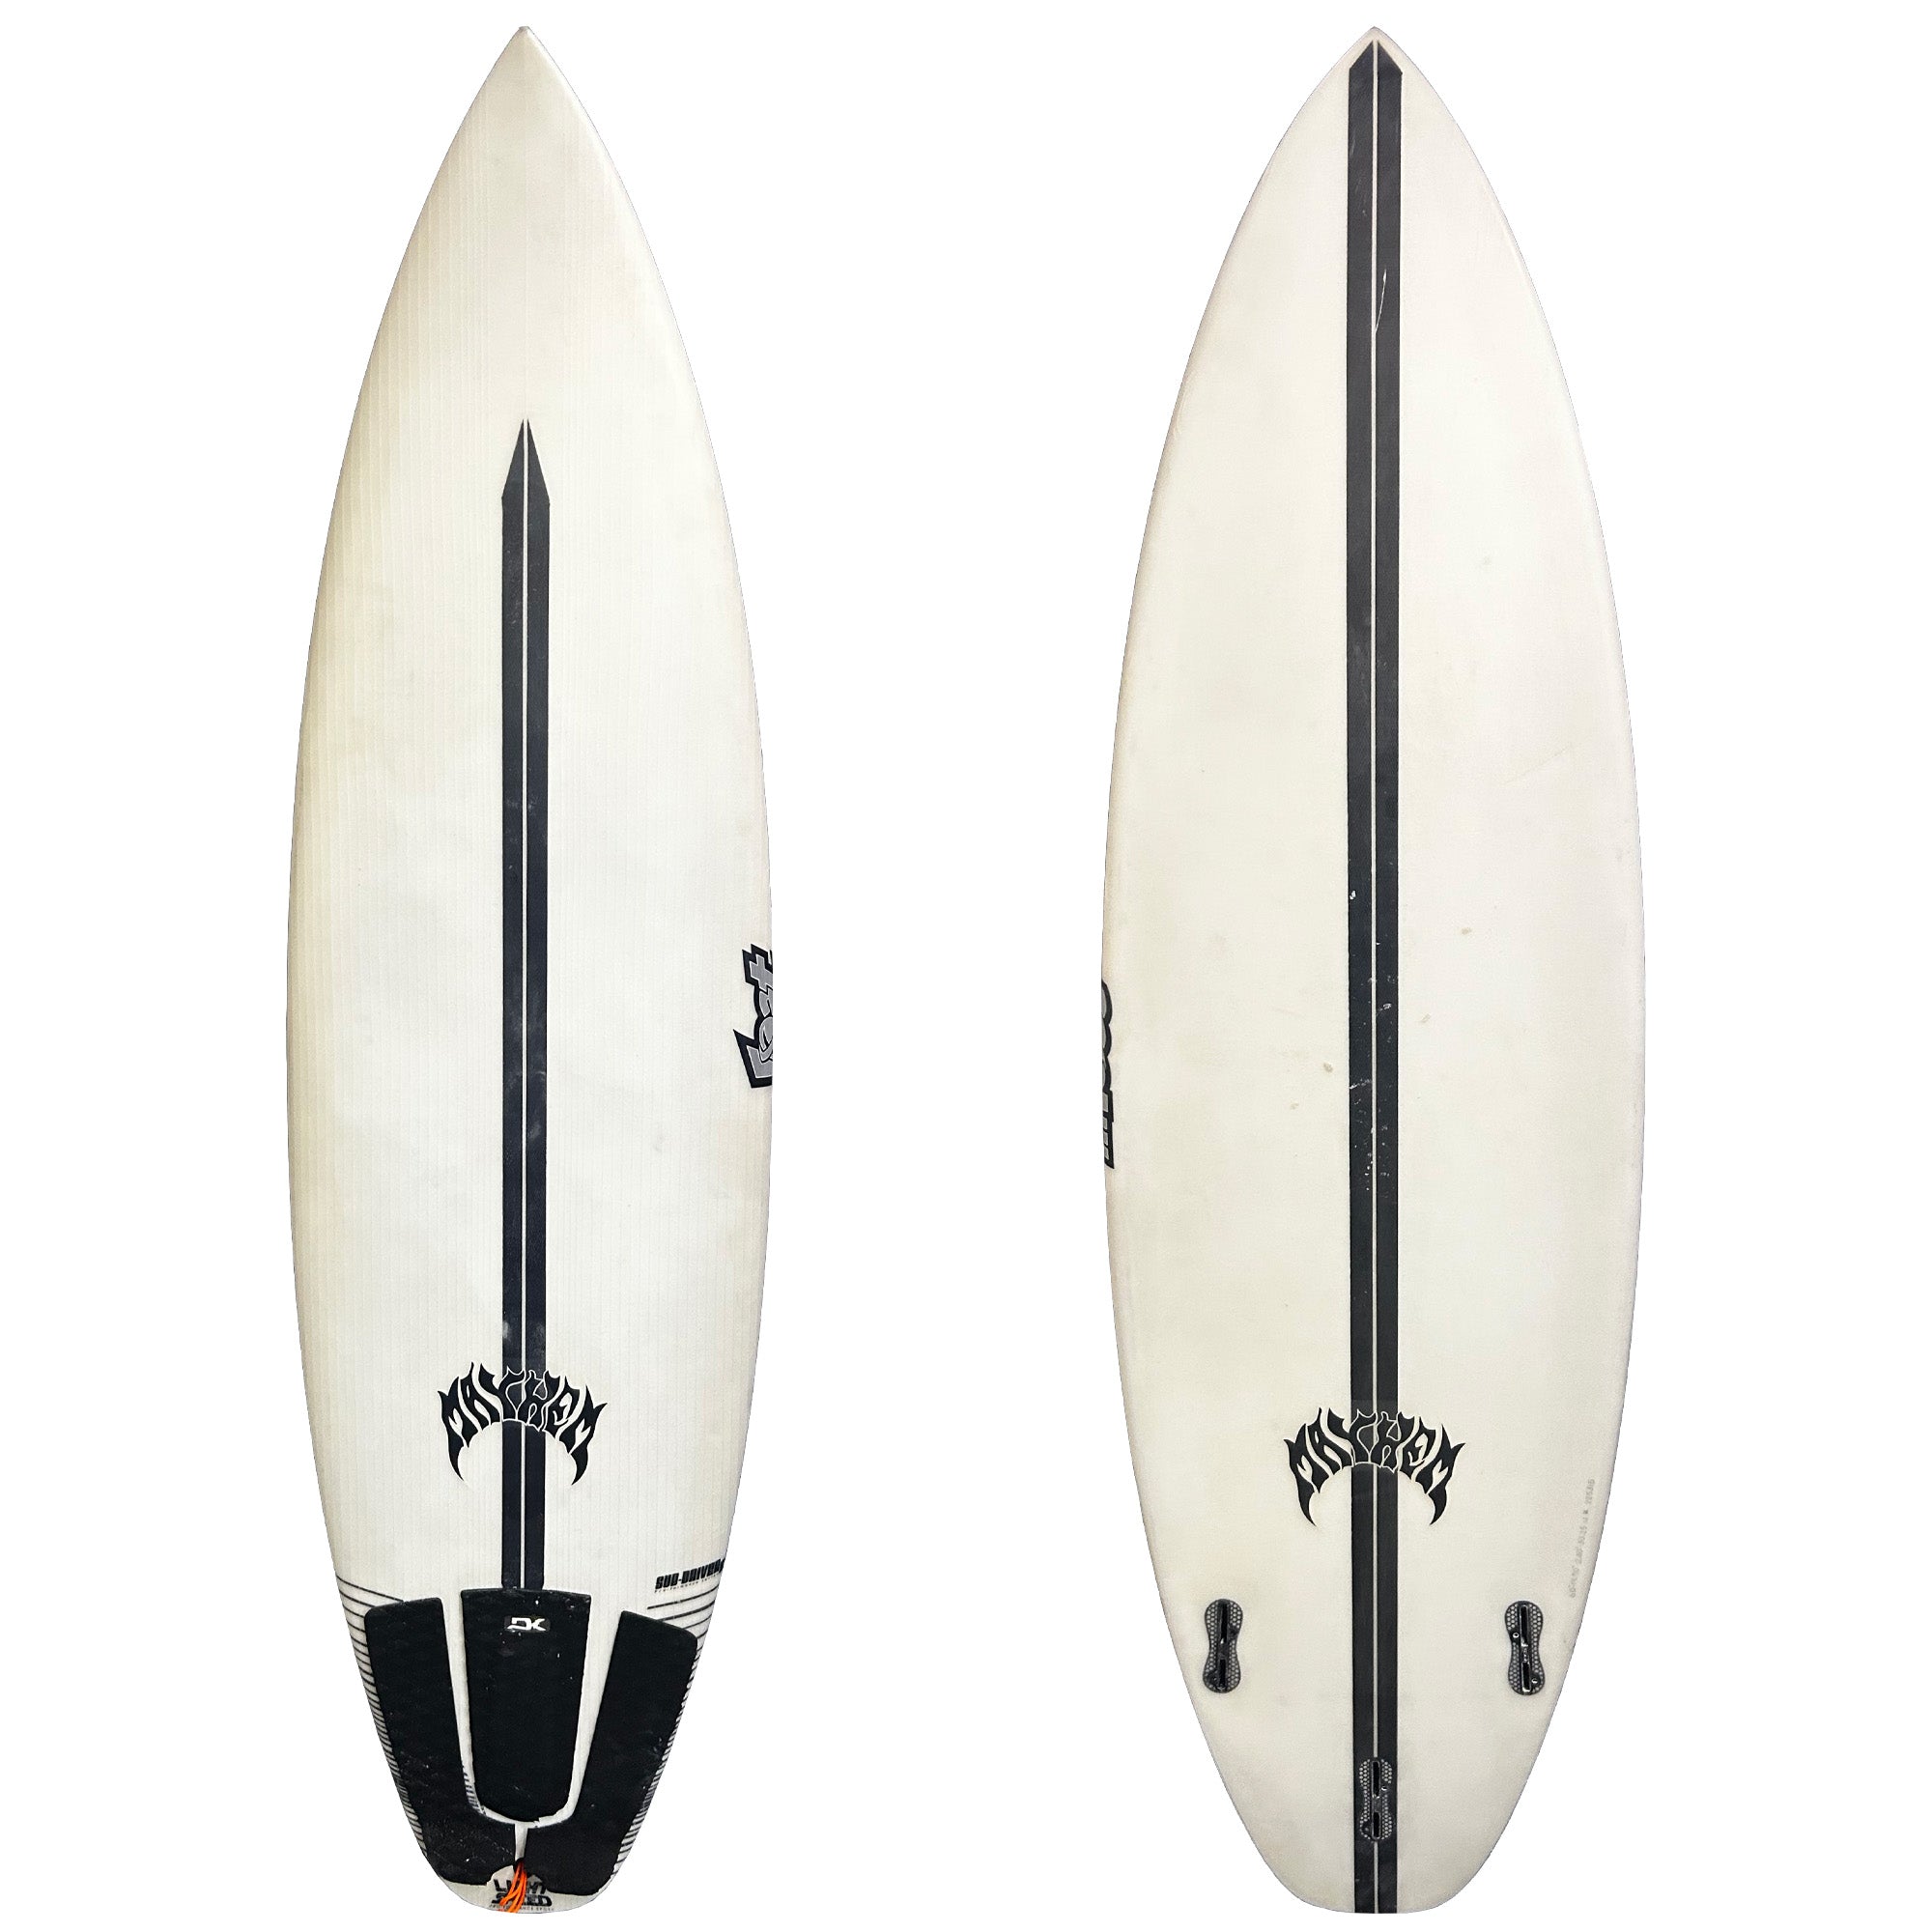 Lost Sub-Driver 2.0 6'0 Used Surfboard